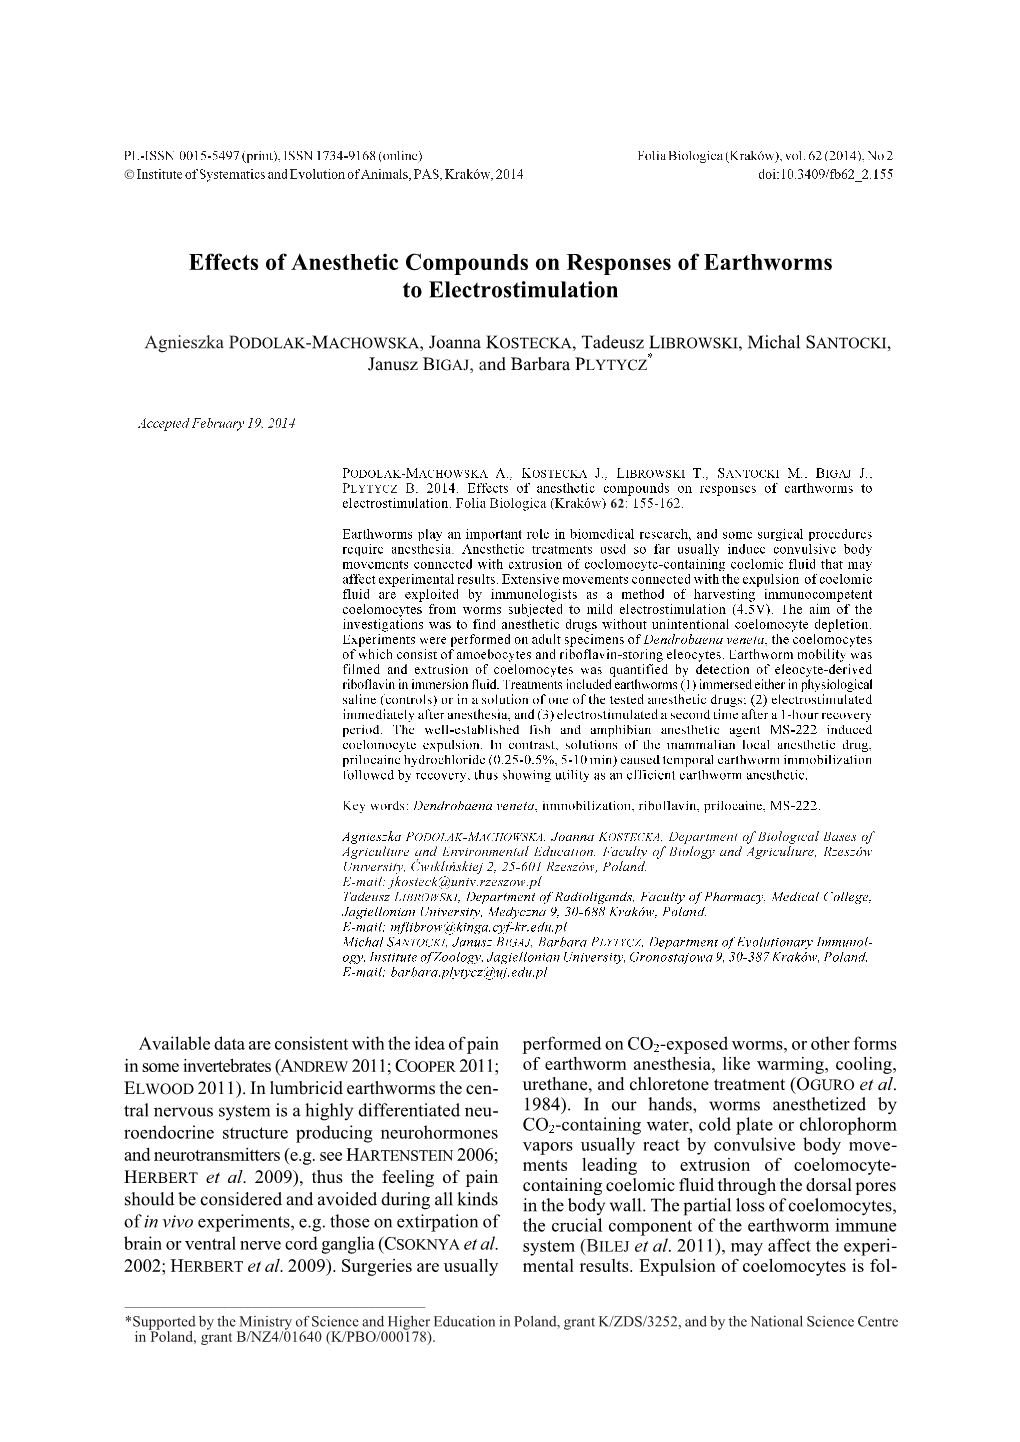 Effects of Anesthetic Compounds on Responses of Earthworms to Electrostimulation